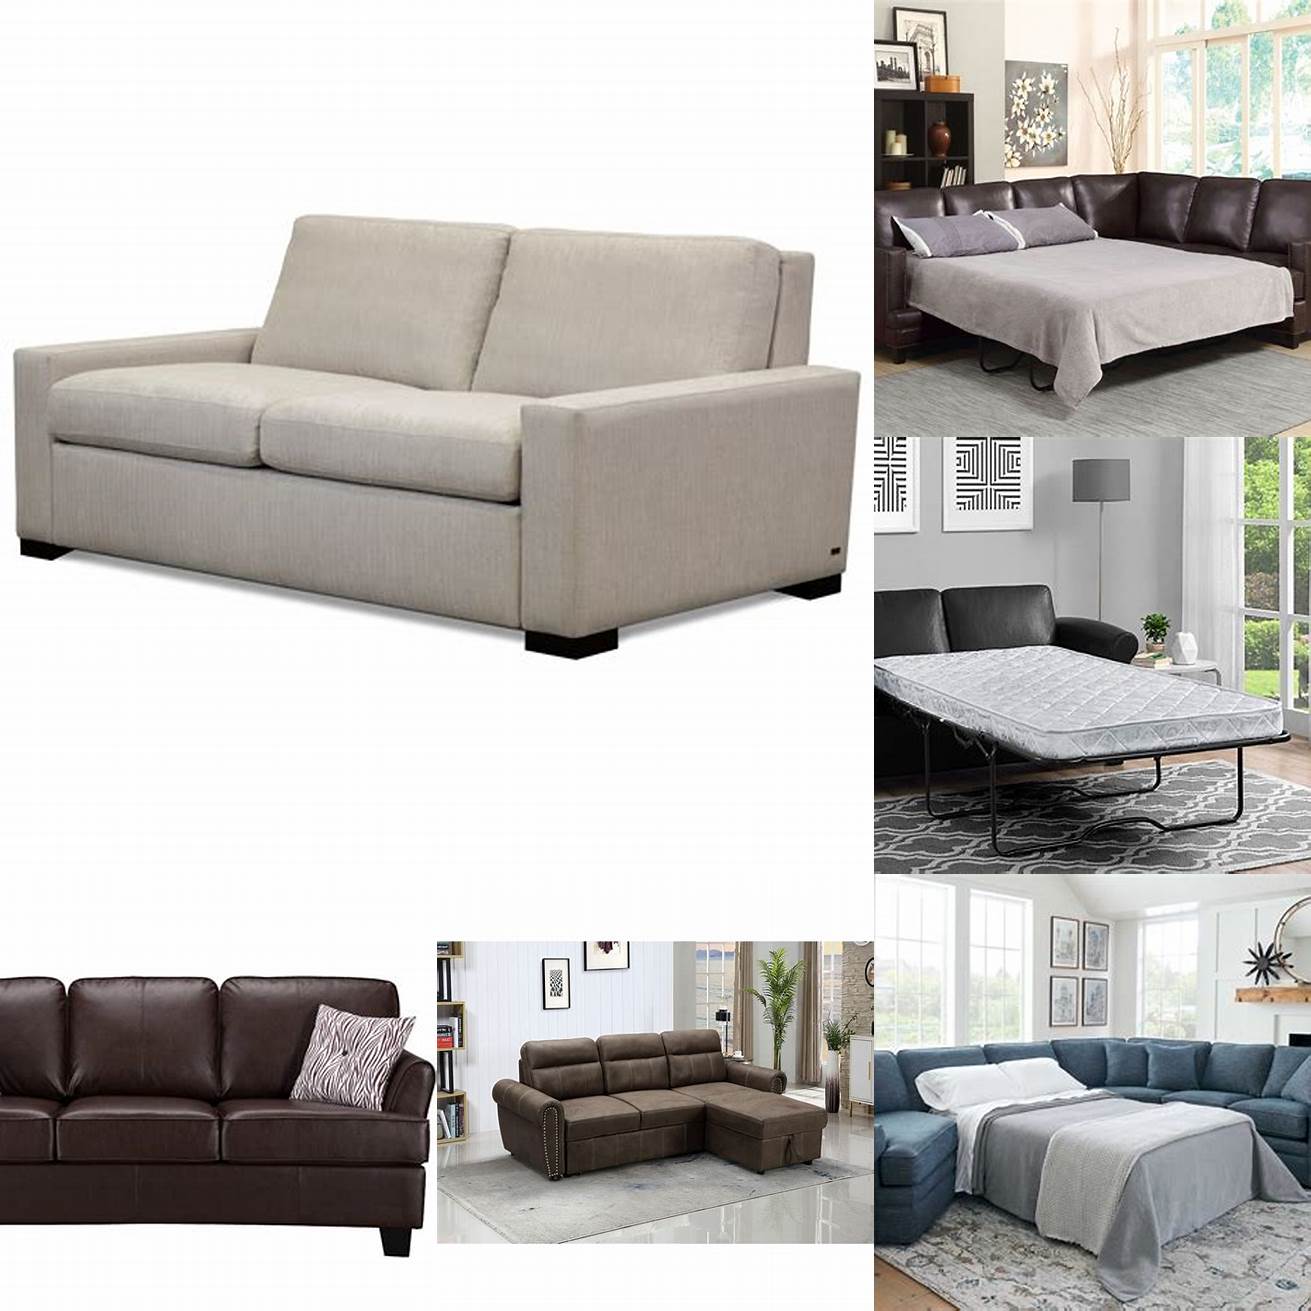 Material Full Sleeper Sofas come in different materials such as leather fabric and microfiber